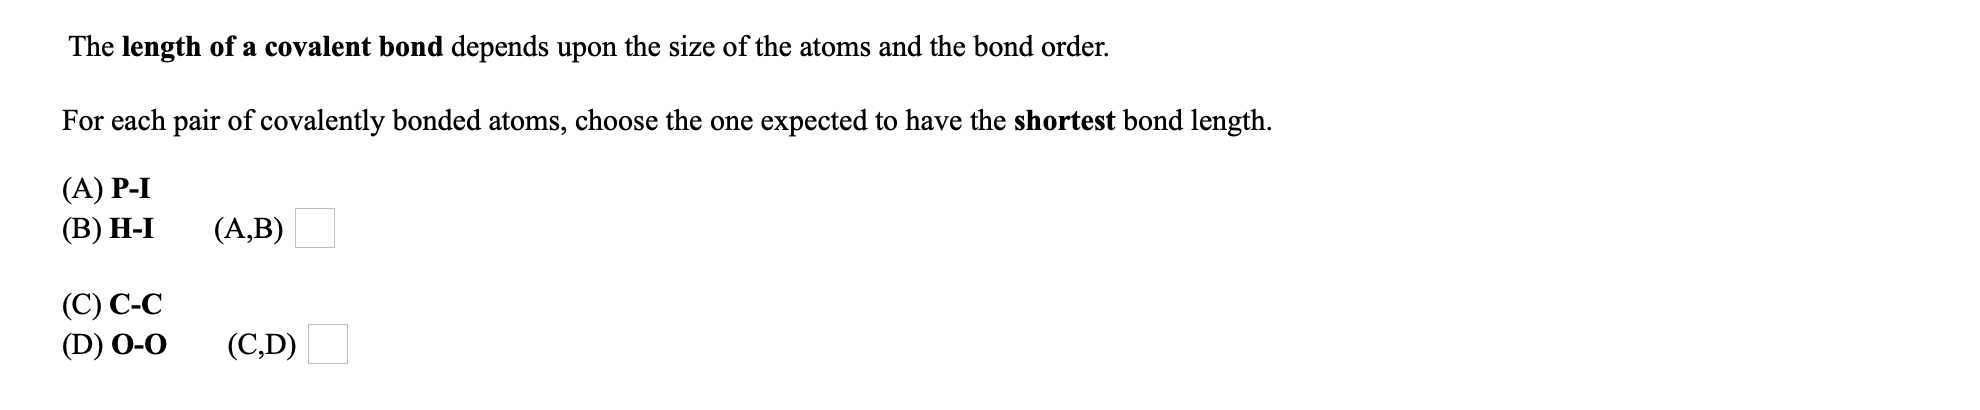 The length of a covalent bond depends upon the size of the atoms and the bond order.
For each pair of covalently bonded atoms, choose the one expected to have the shortest bond length.
(A) P-I
(В) Н-І
(A,B)
(C) C-C
(D) 0-0
(C,D)
